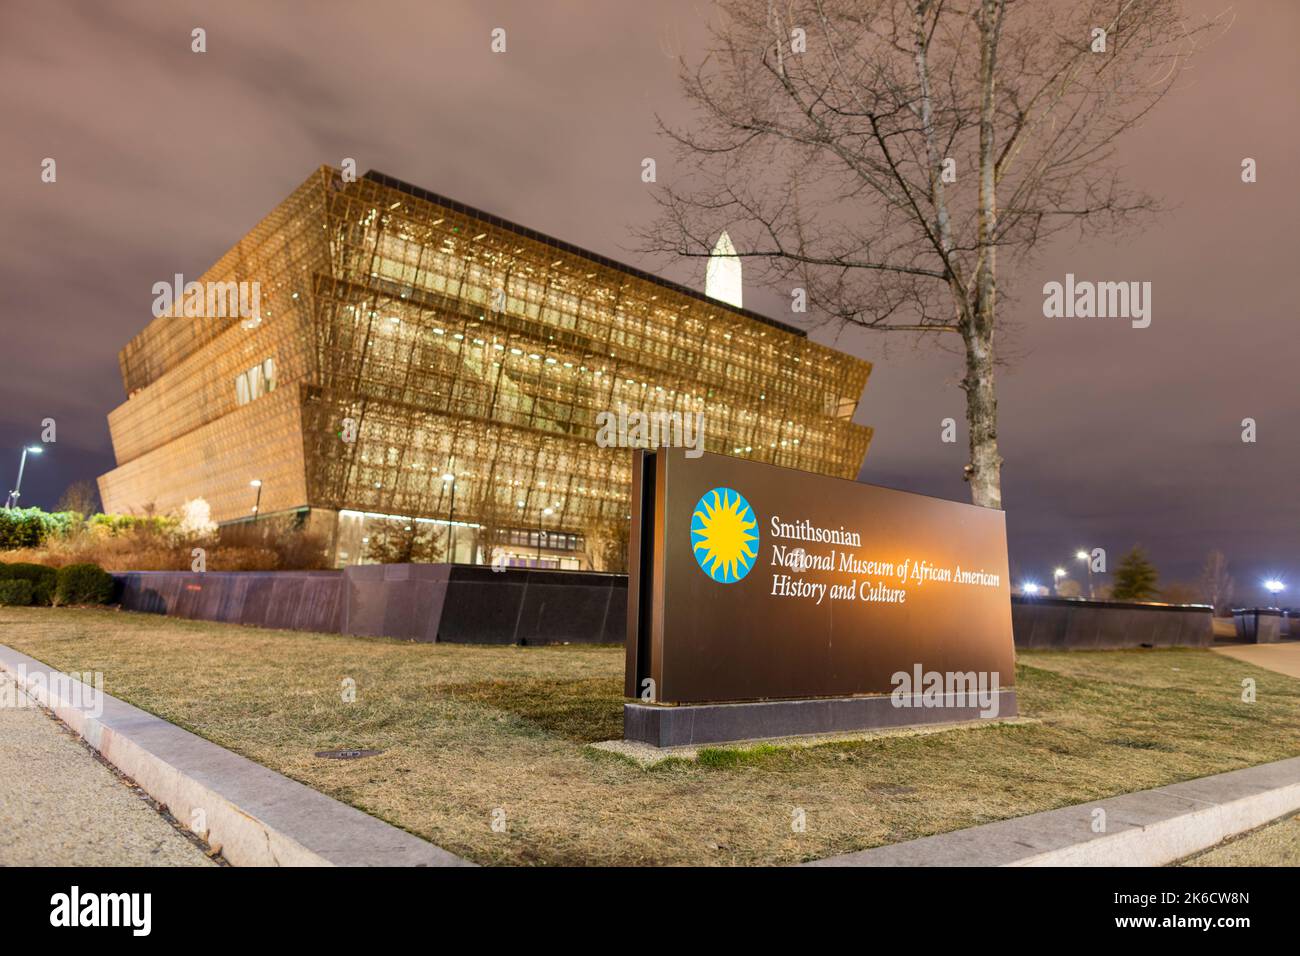 A sign for the Smithsonian National Museum of African American History and Culture seen on a winter evening. Stock Photo